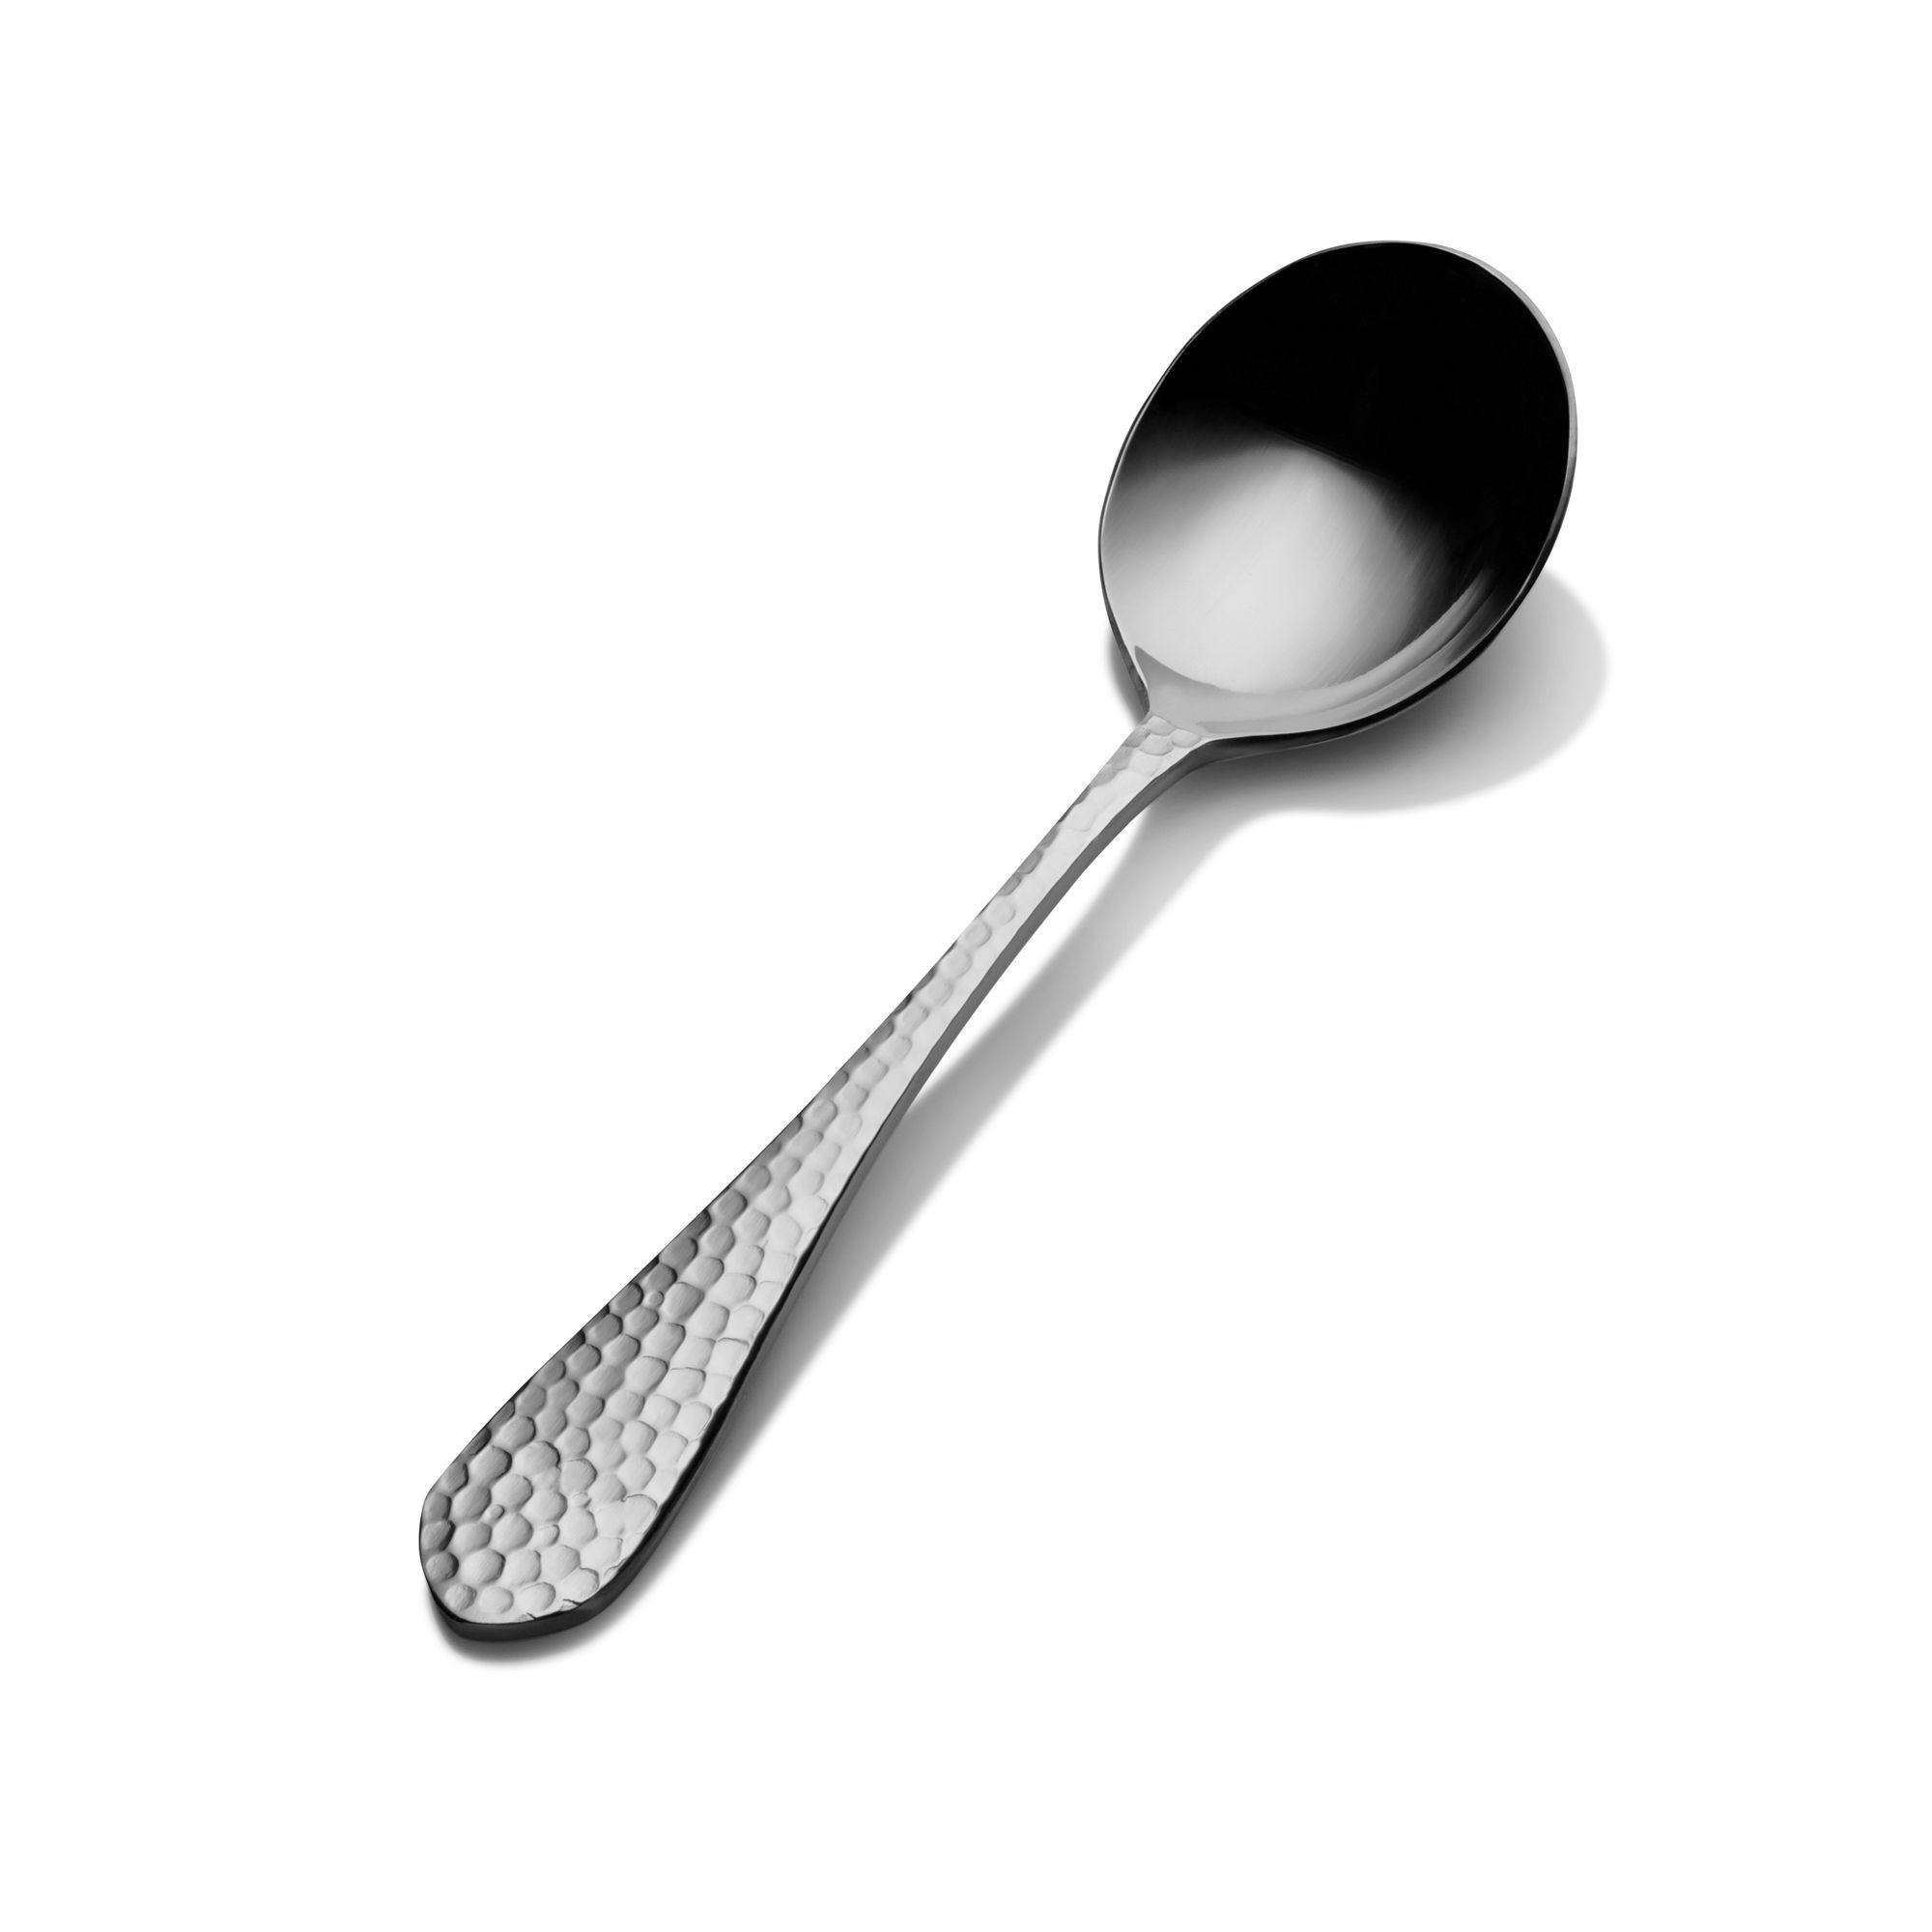 Bon Chef S1201S Reflections 18/8 Stainless Steel Silverplated Bouillon Spoon